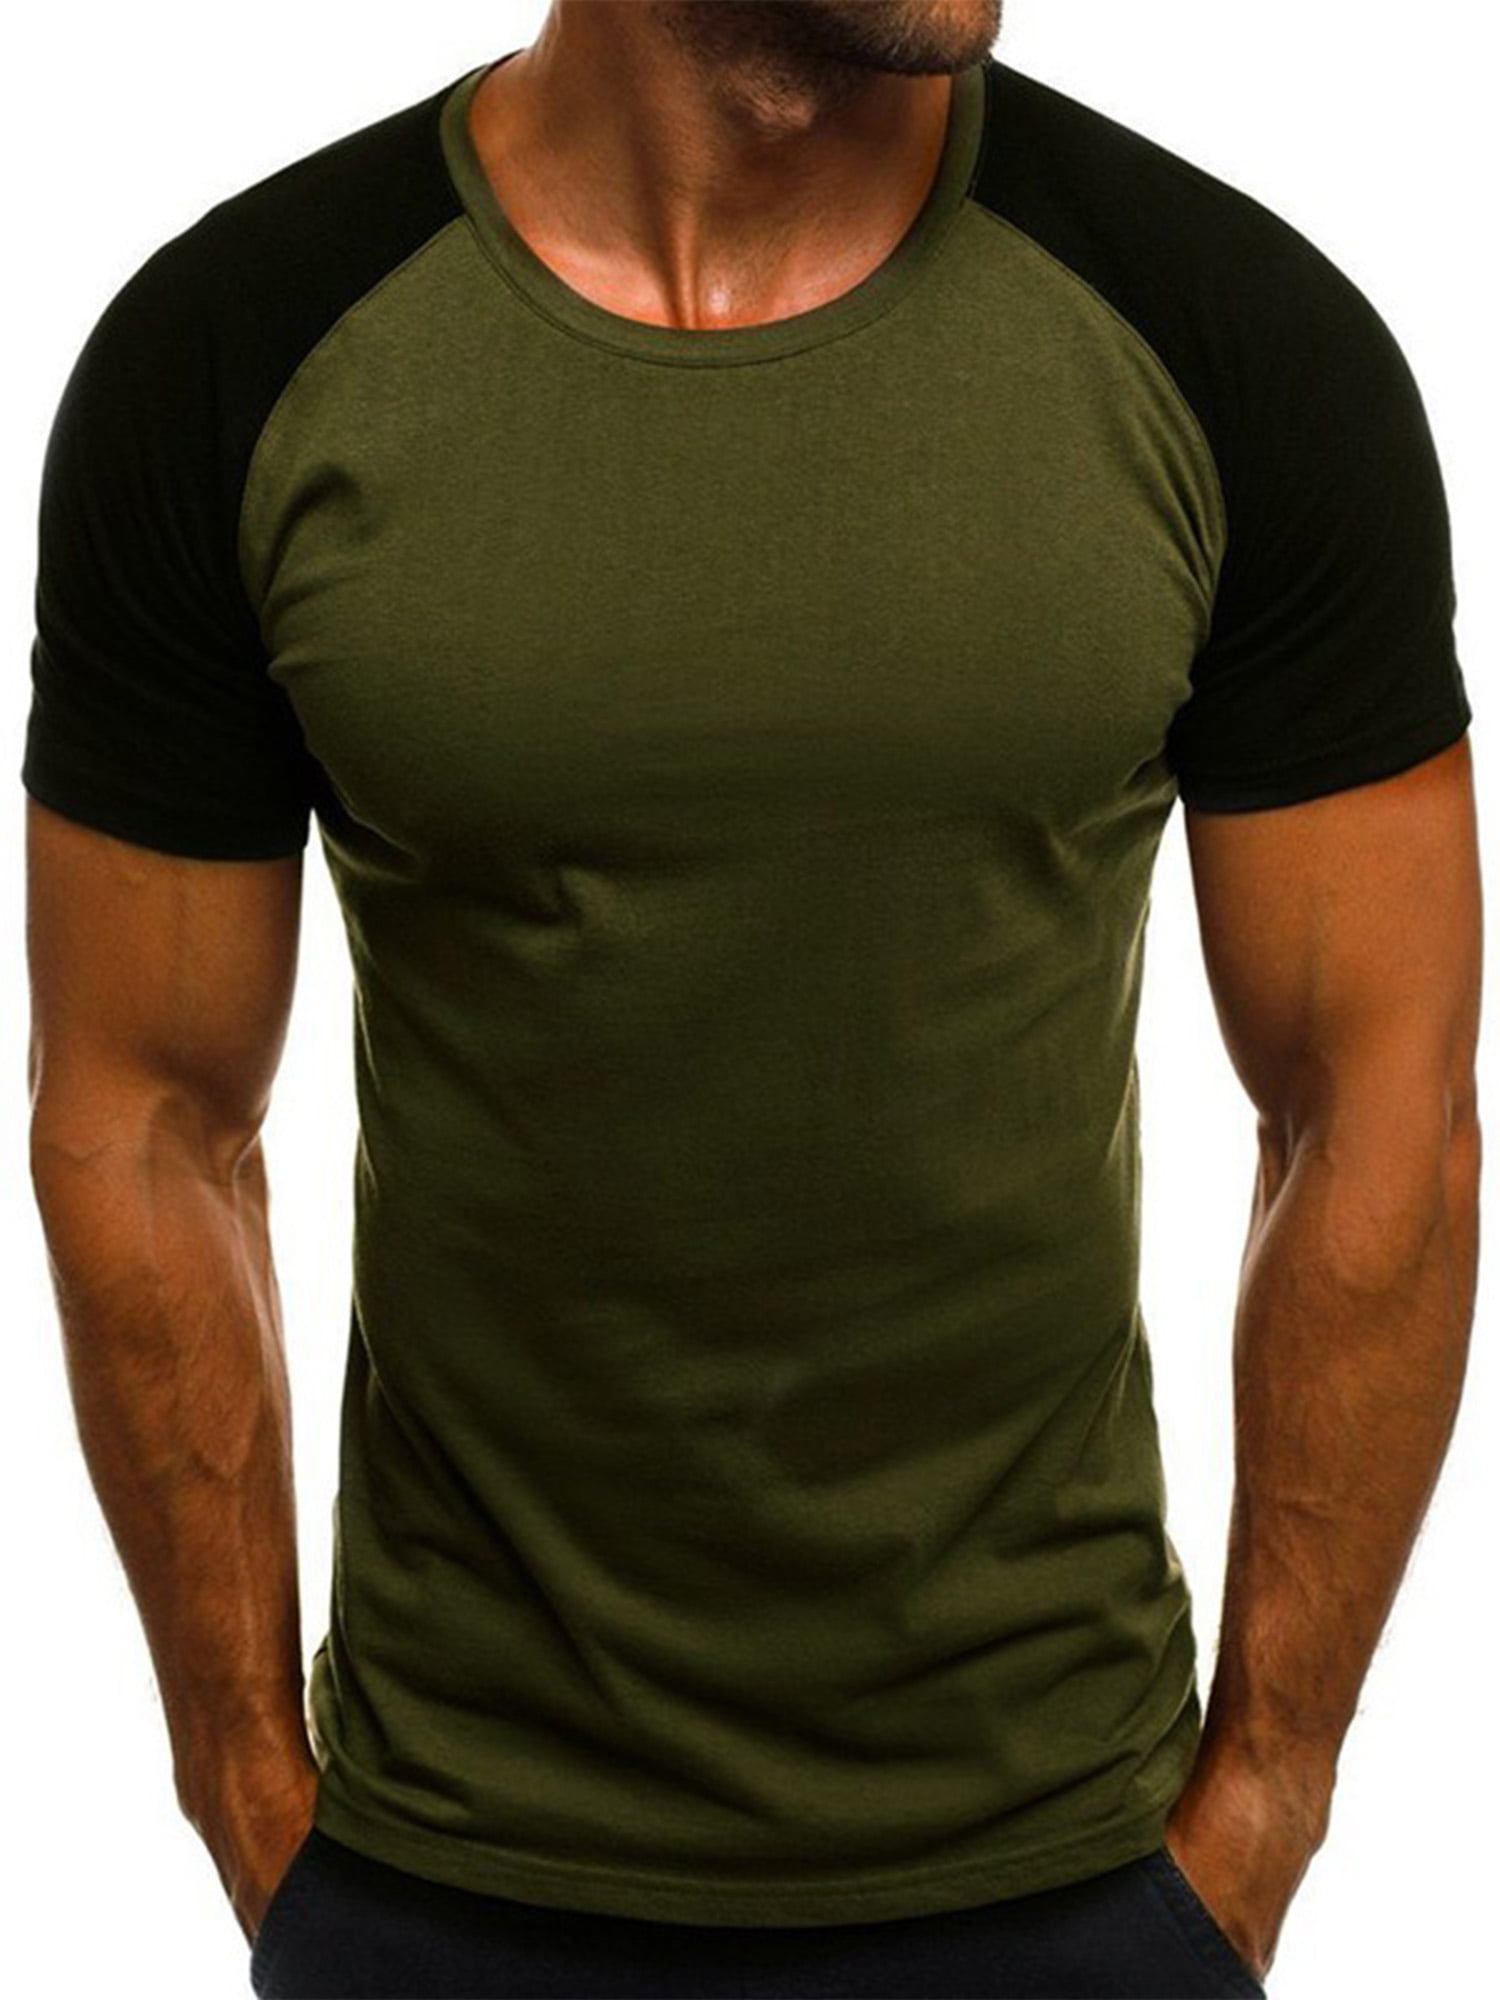 Men Athletic T Shirts Tees Short Sleeve Muscle Cut for Bodybuilding Workout Training Fitness Tops Crew Neck Cotton